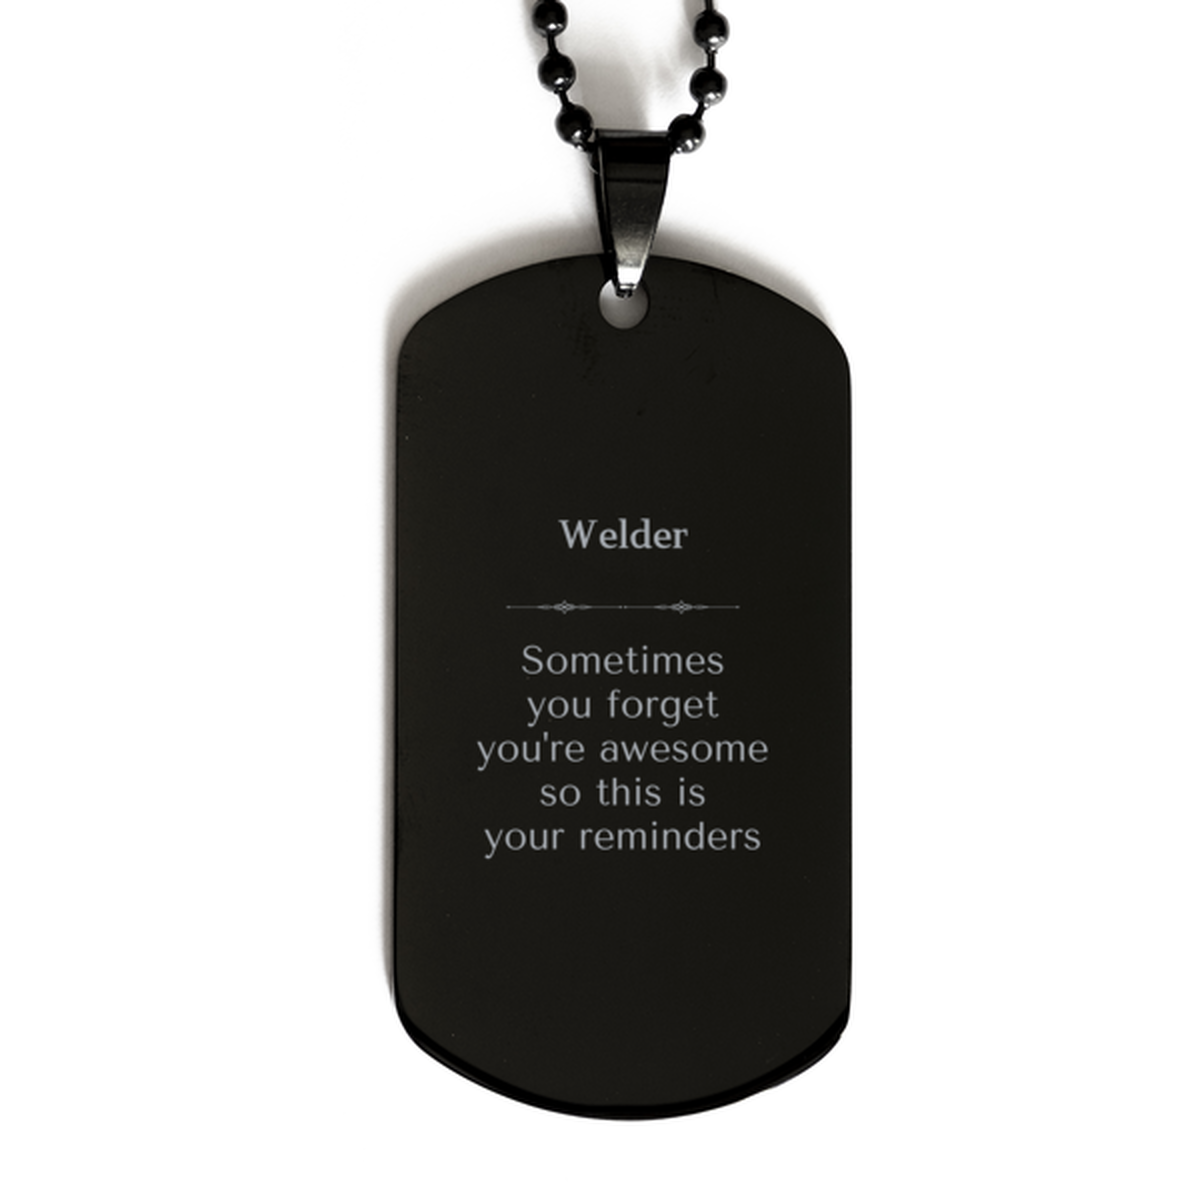 Sentimental Welder Black Dog Tag, Welder Sometimes you forget you're awesome so this is your reminders, Graduation Christmas Birthday Gifts for Welder, Men, Women, Coworkers